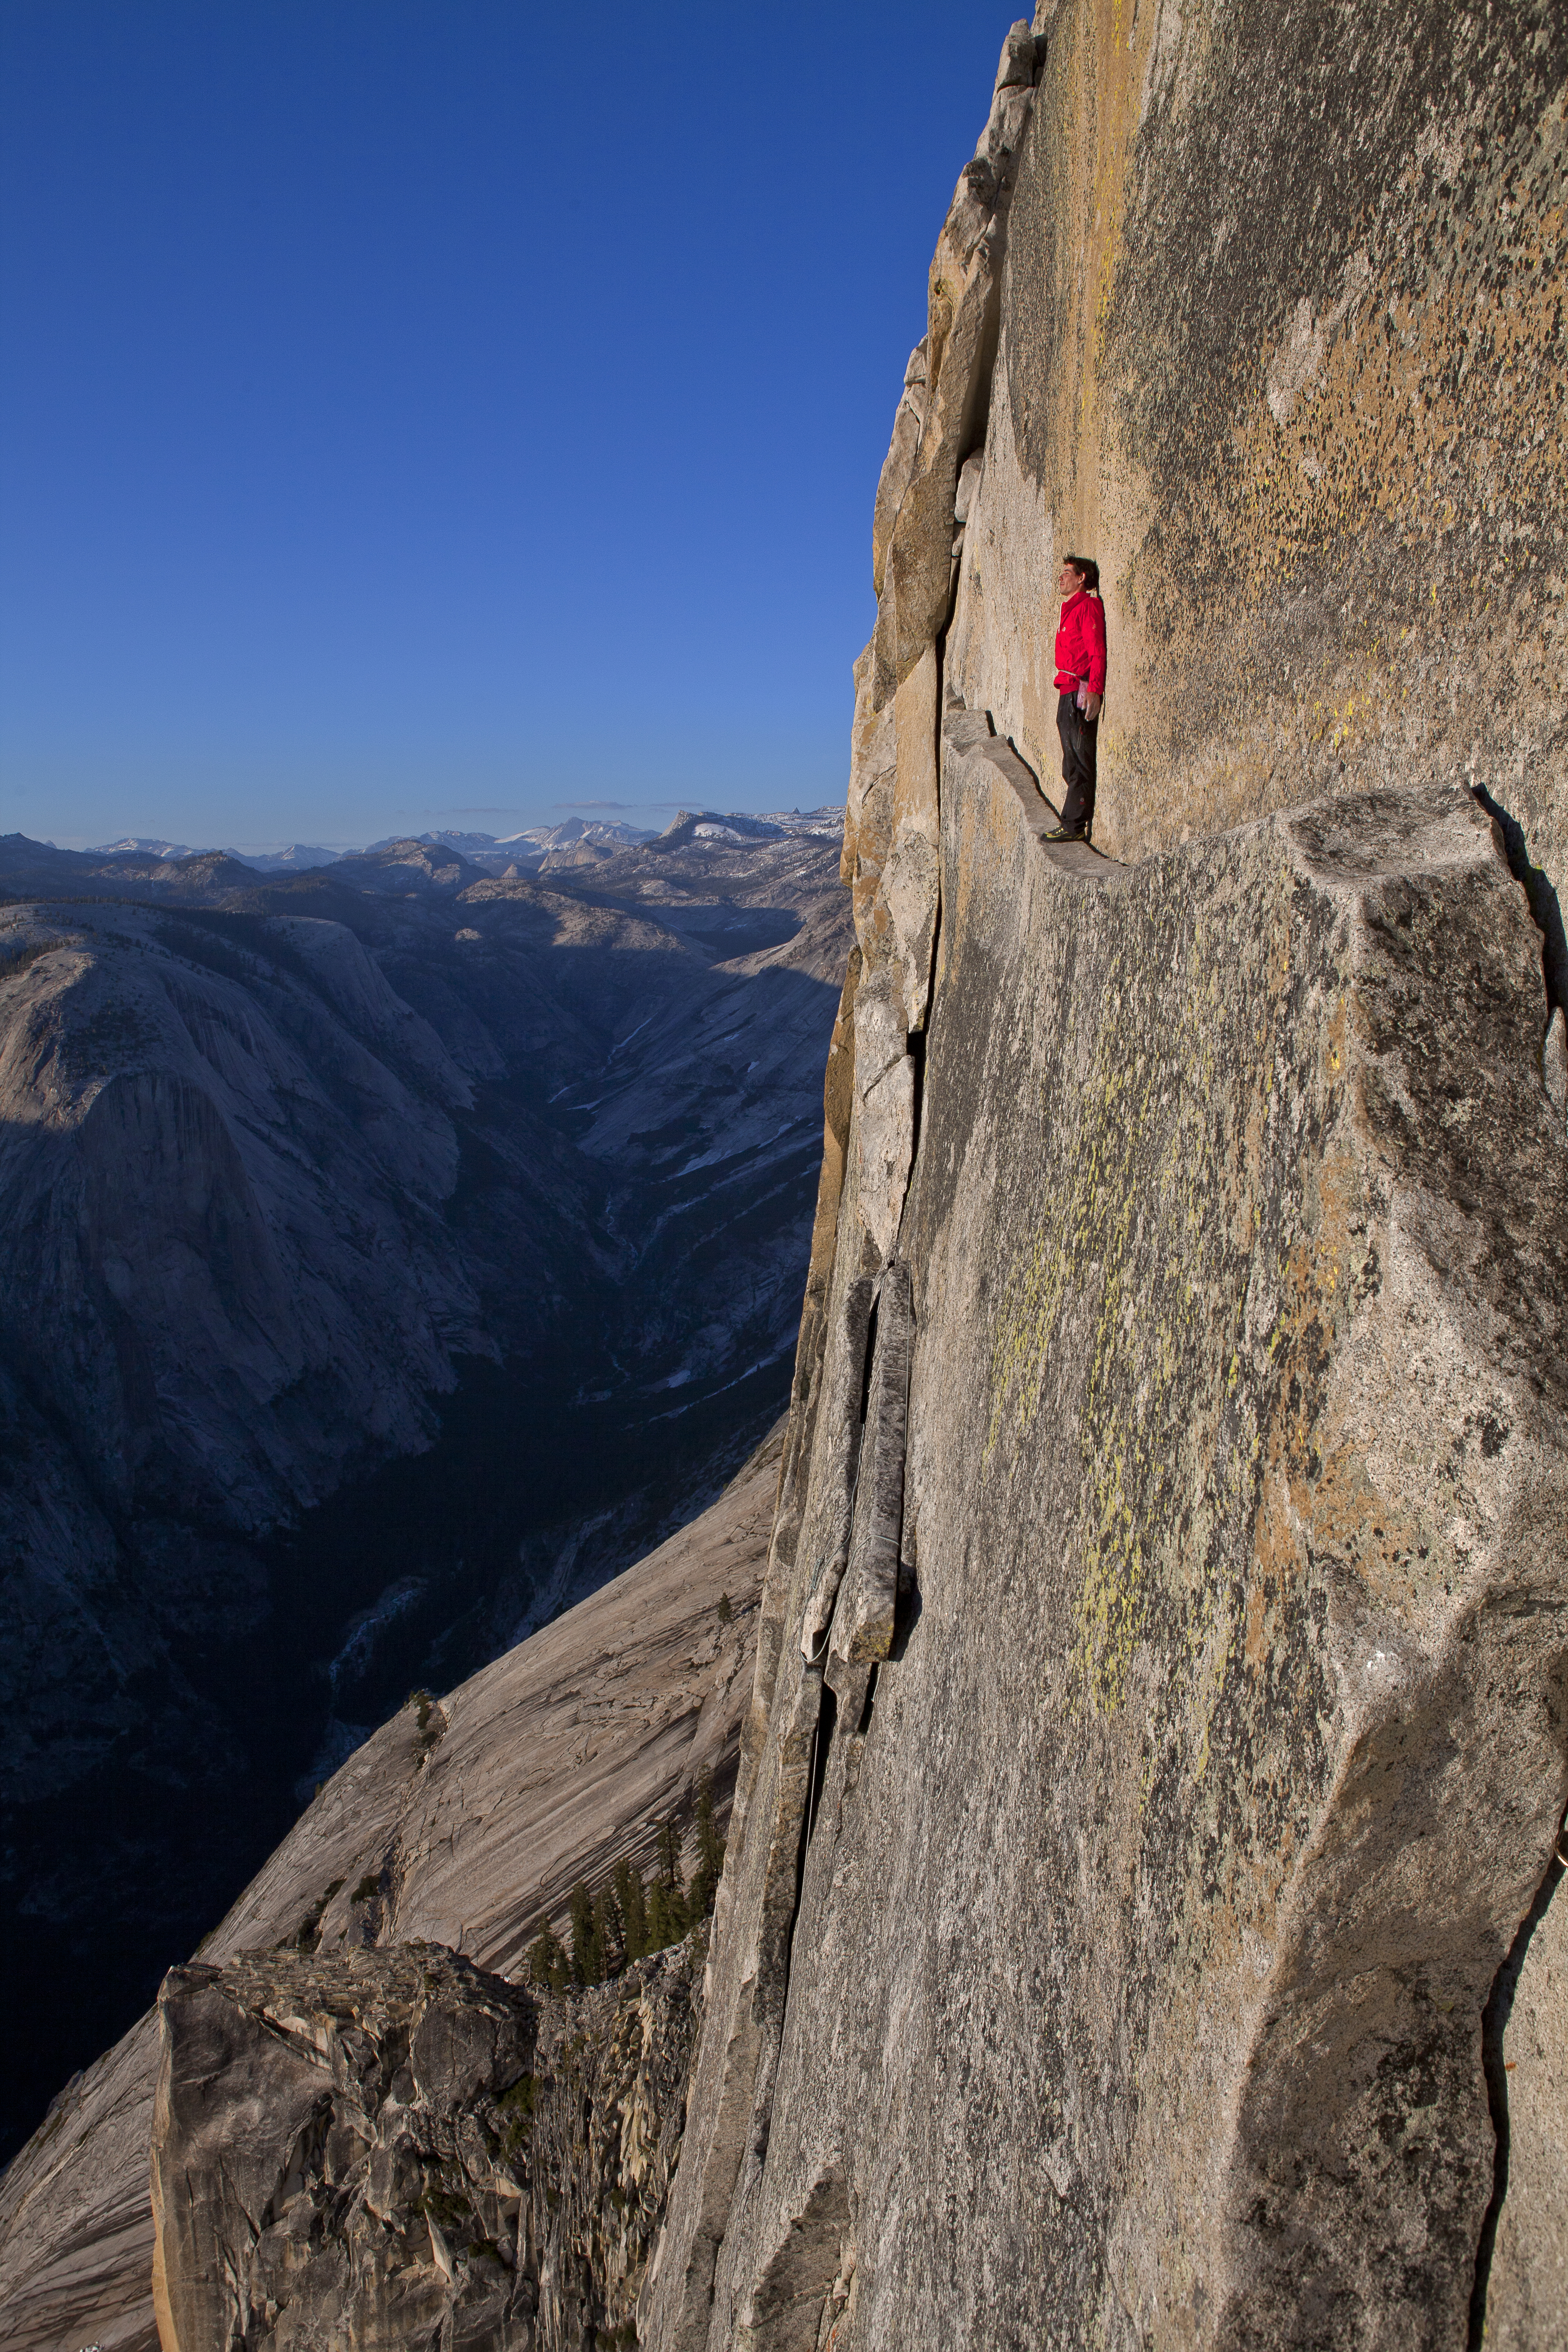 Alex stands on a precarious ledge on the Northwest Face of Half Dome, in 2018